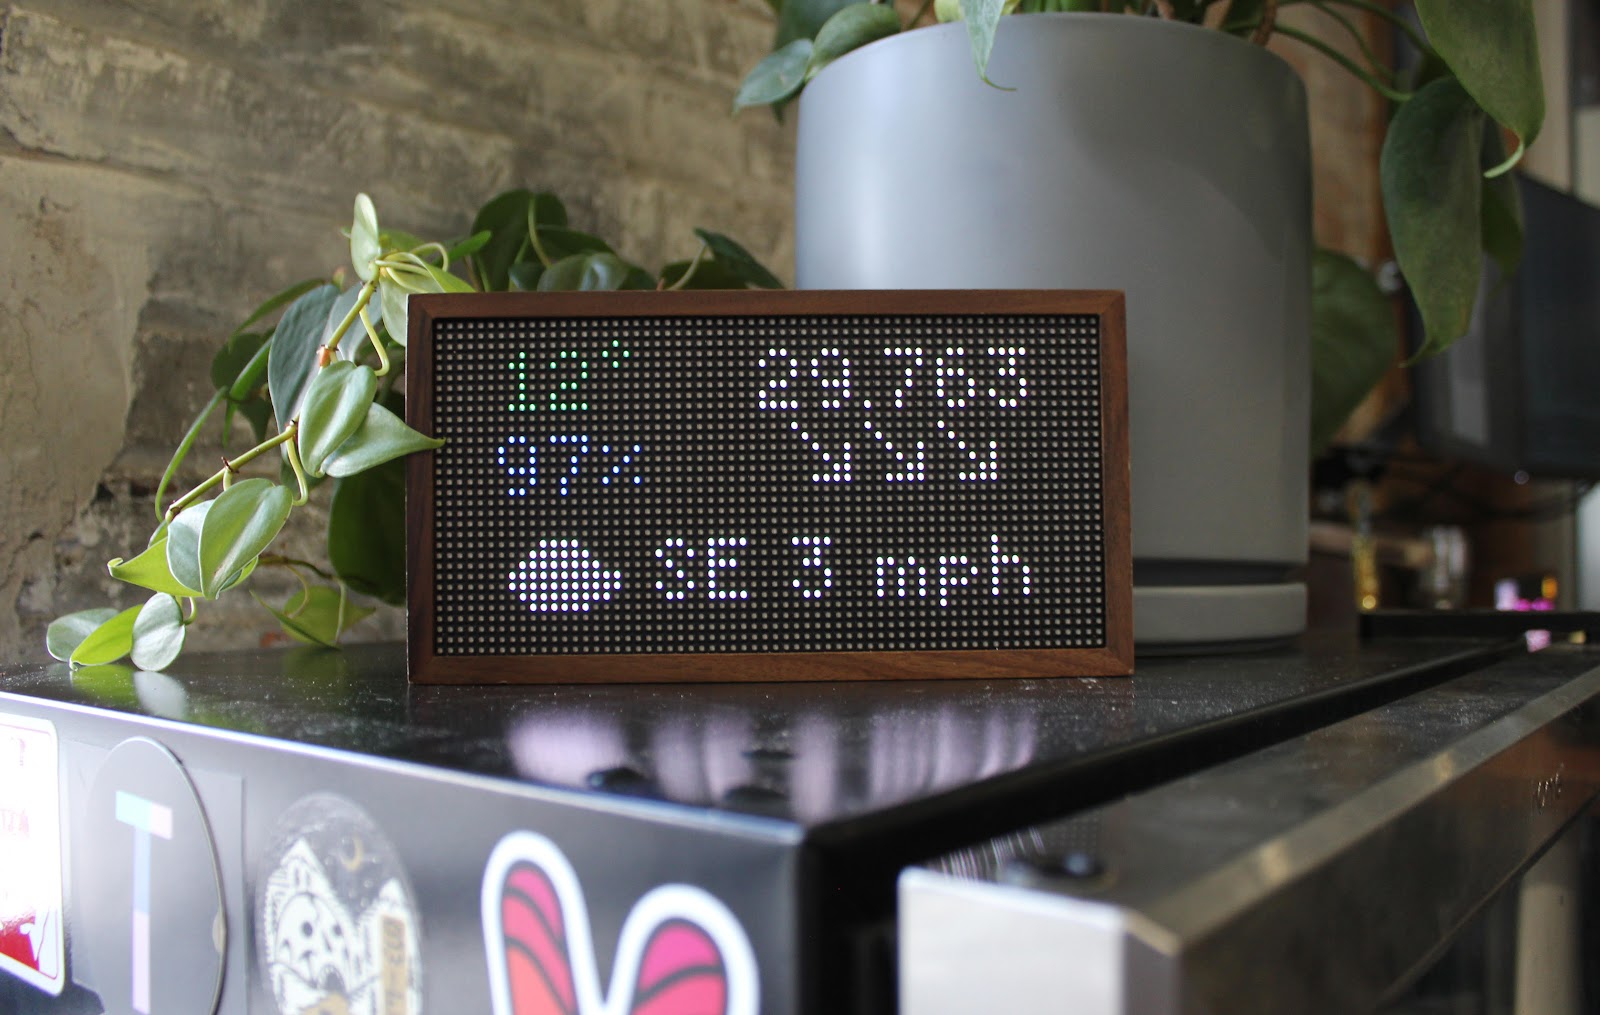 Tidbyt display showing weather data on desk. 